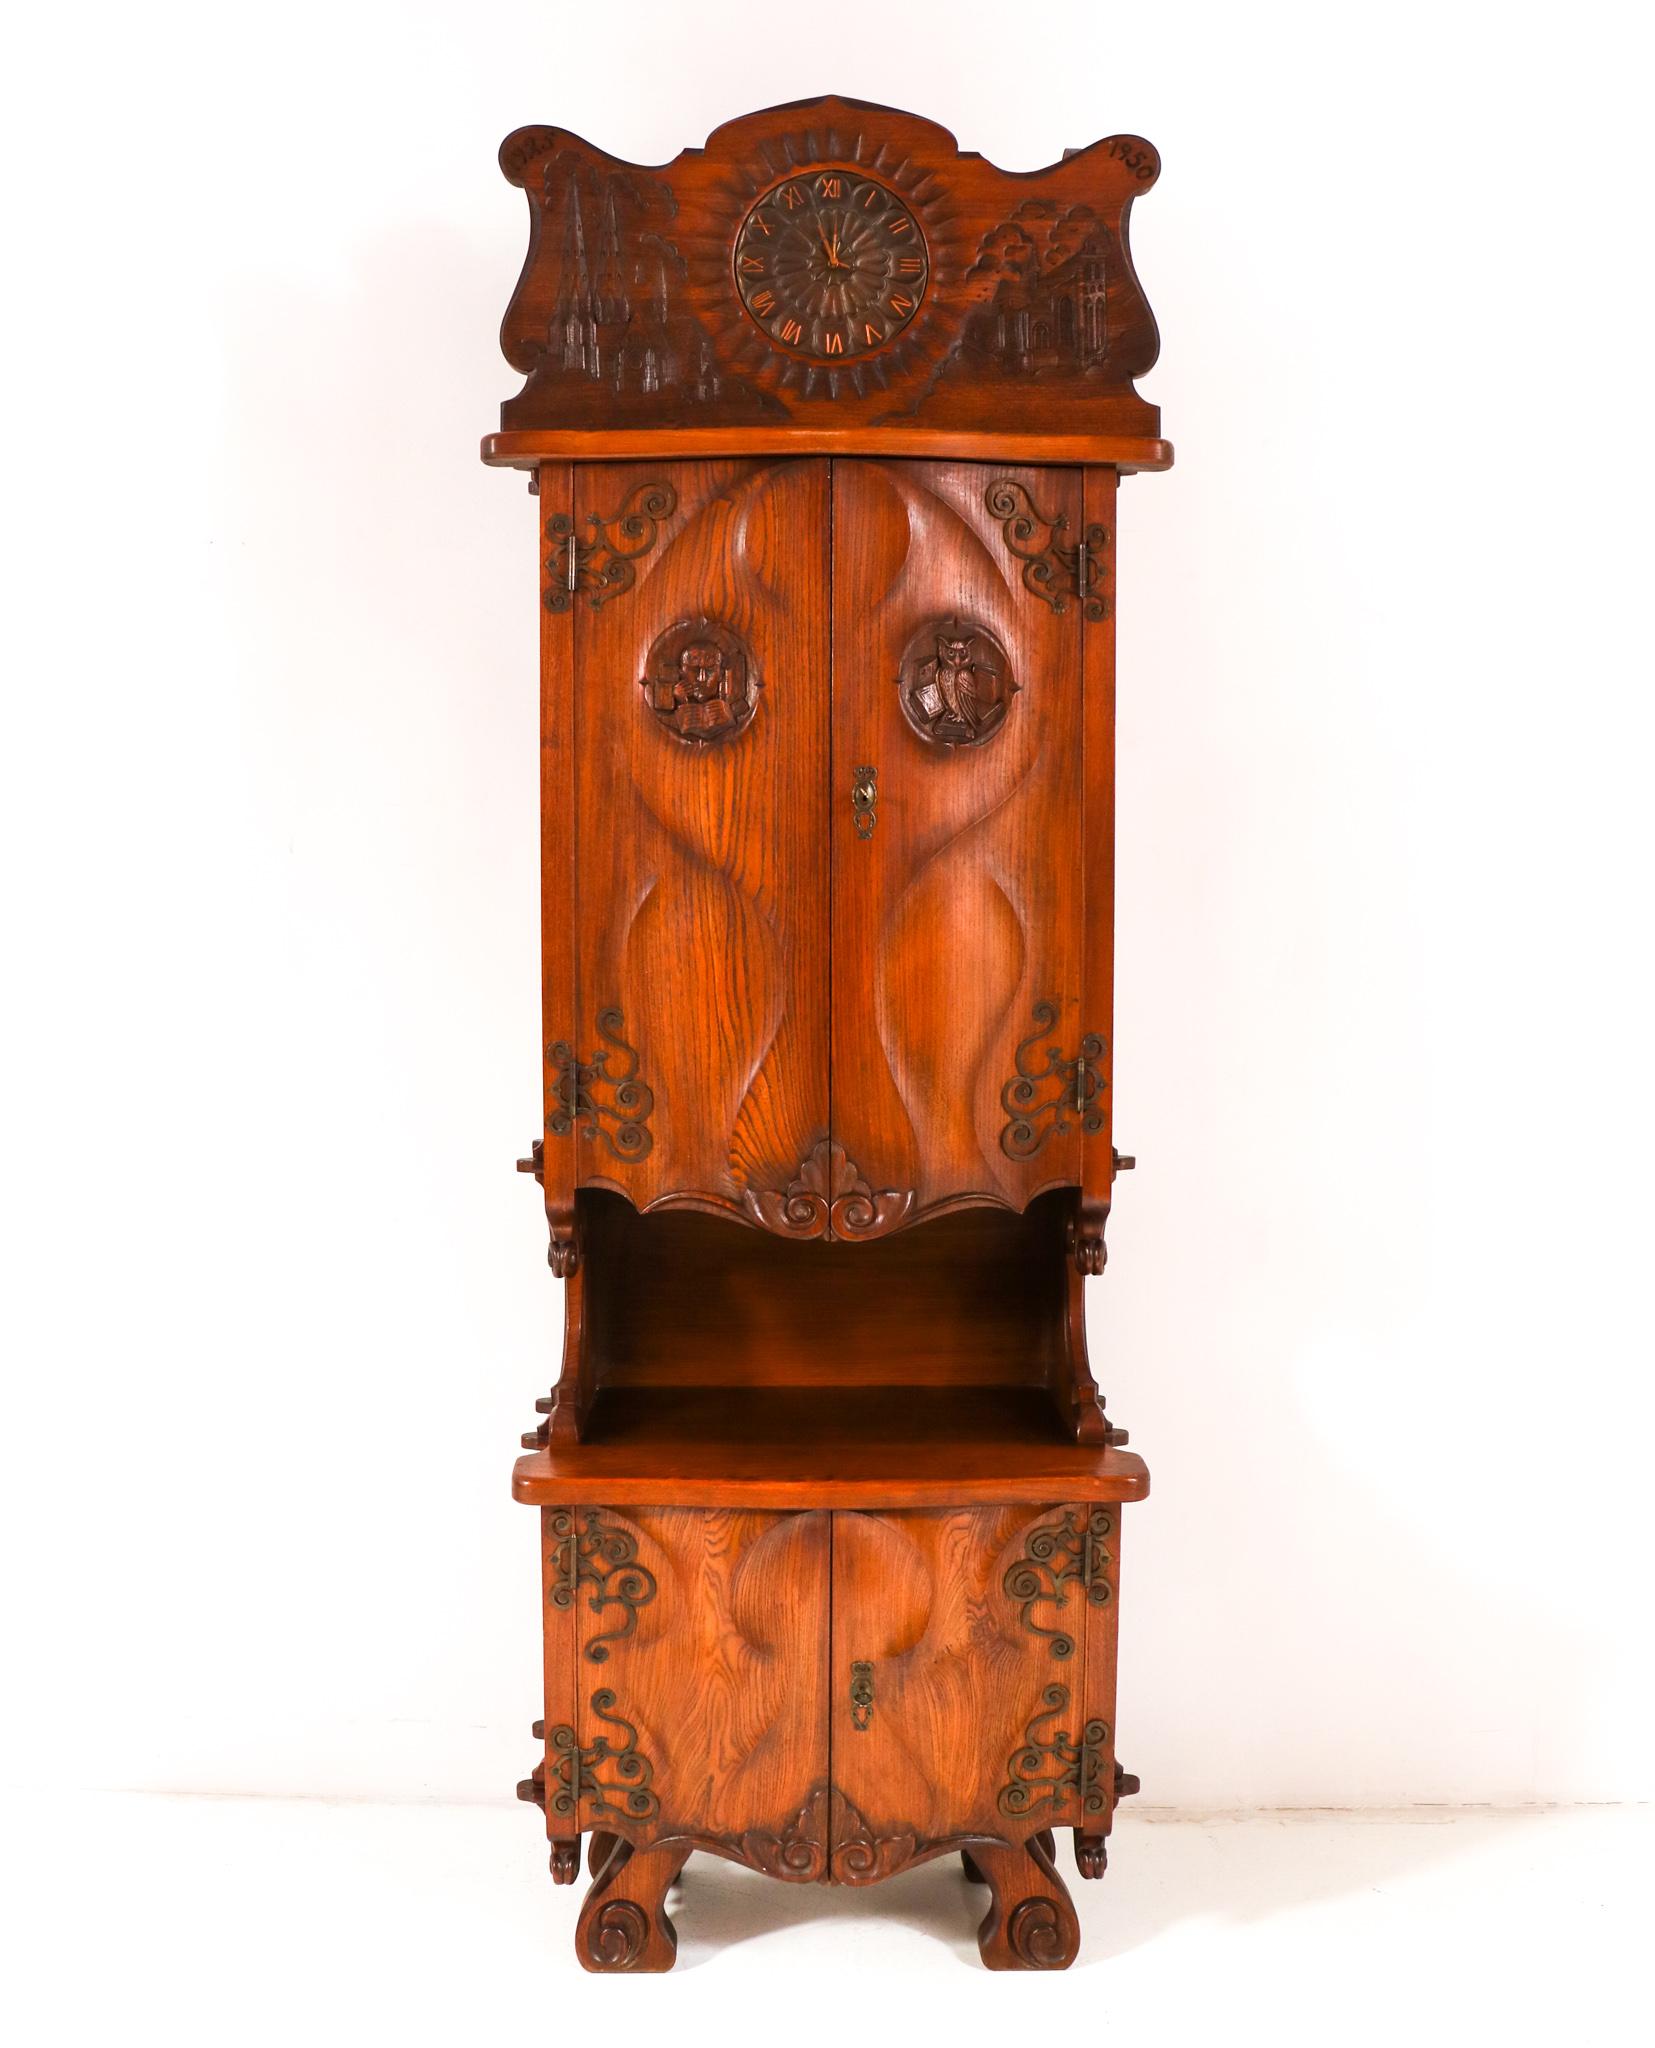 Magnificent and ultra rare Gothic Revival cupboard.
Striking Dutch design from the 1950s.
Solid ash with a integrated patinated brass clock and patinated wrought iron hinges.
Decorated with original hand-crafted elements like churches and an owl